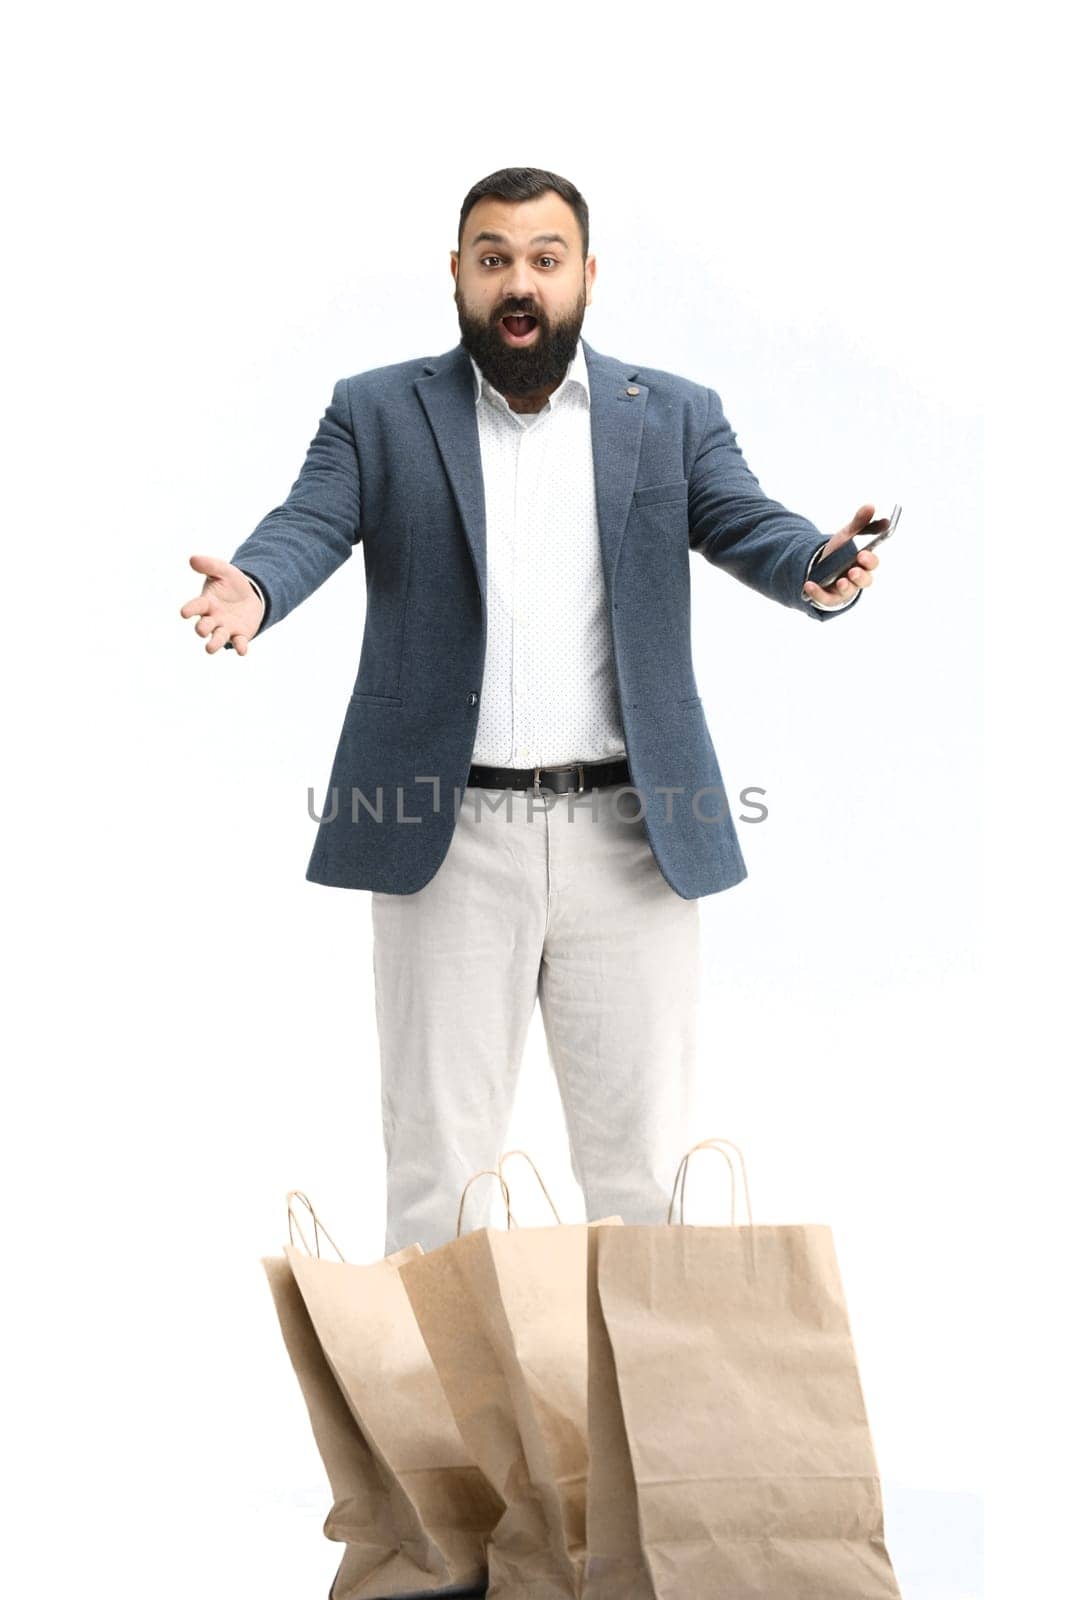 A man, full-length, on a white background, with a phone.